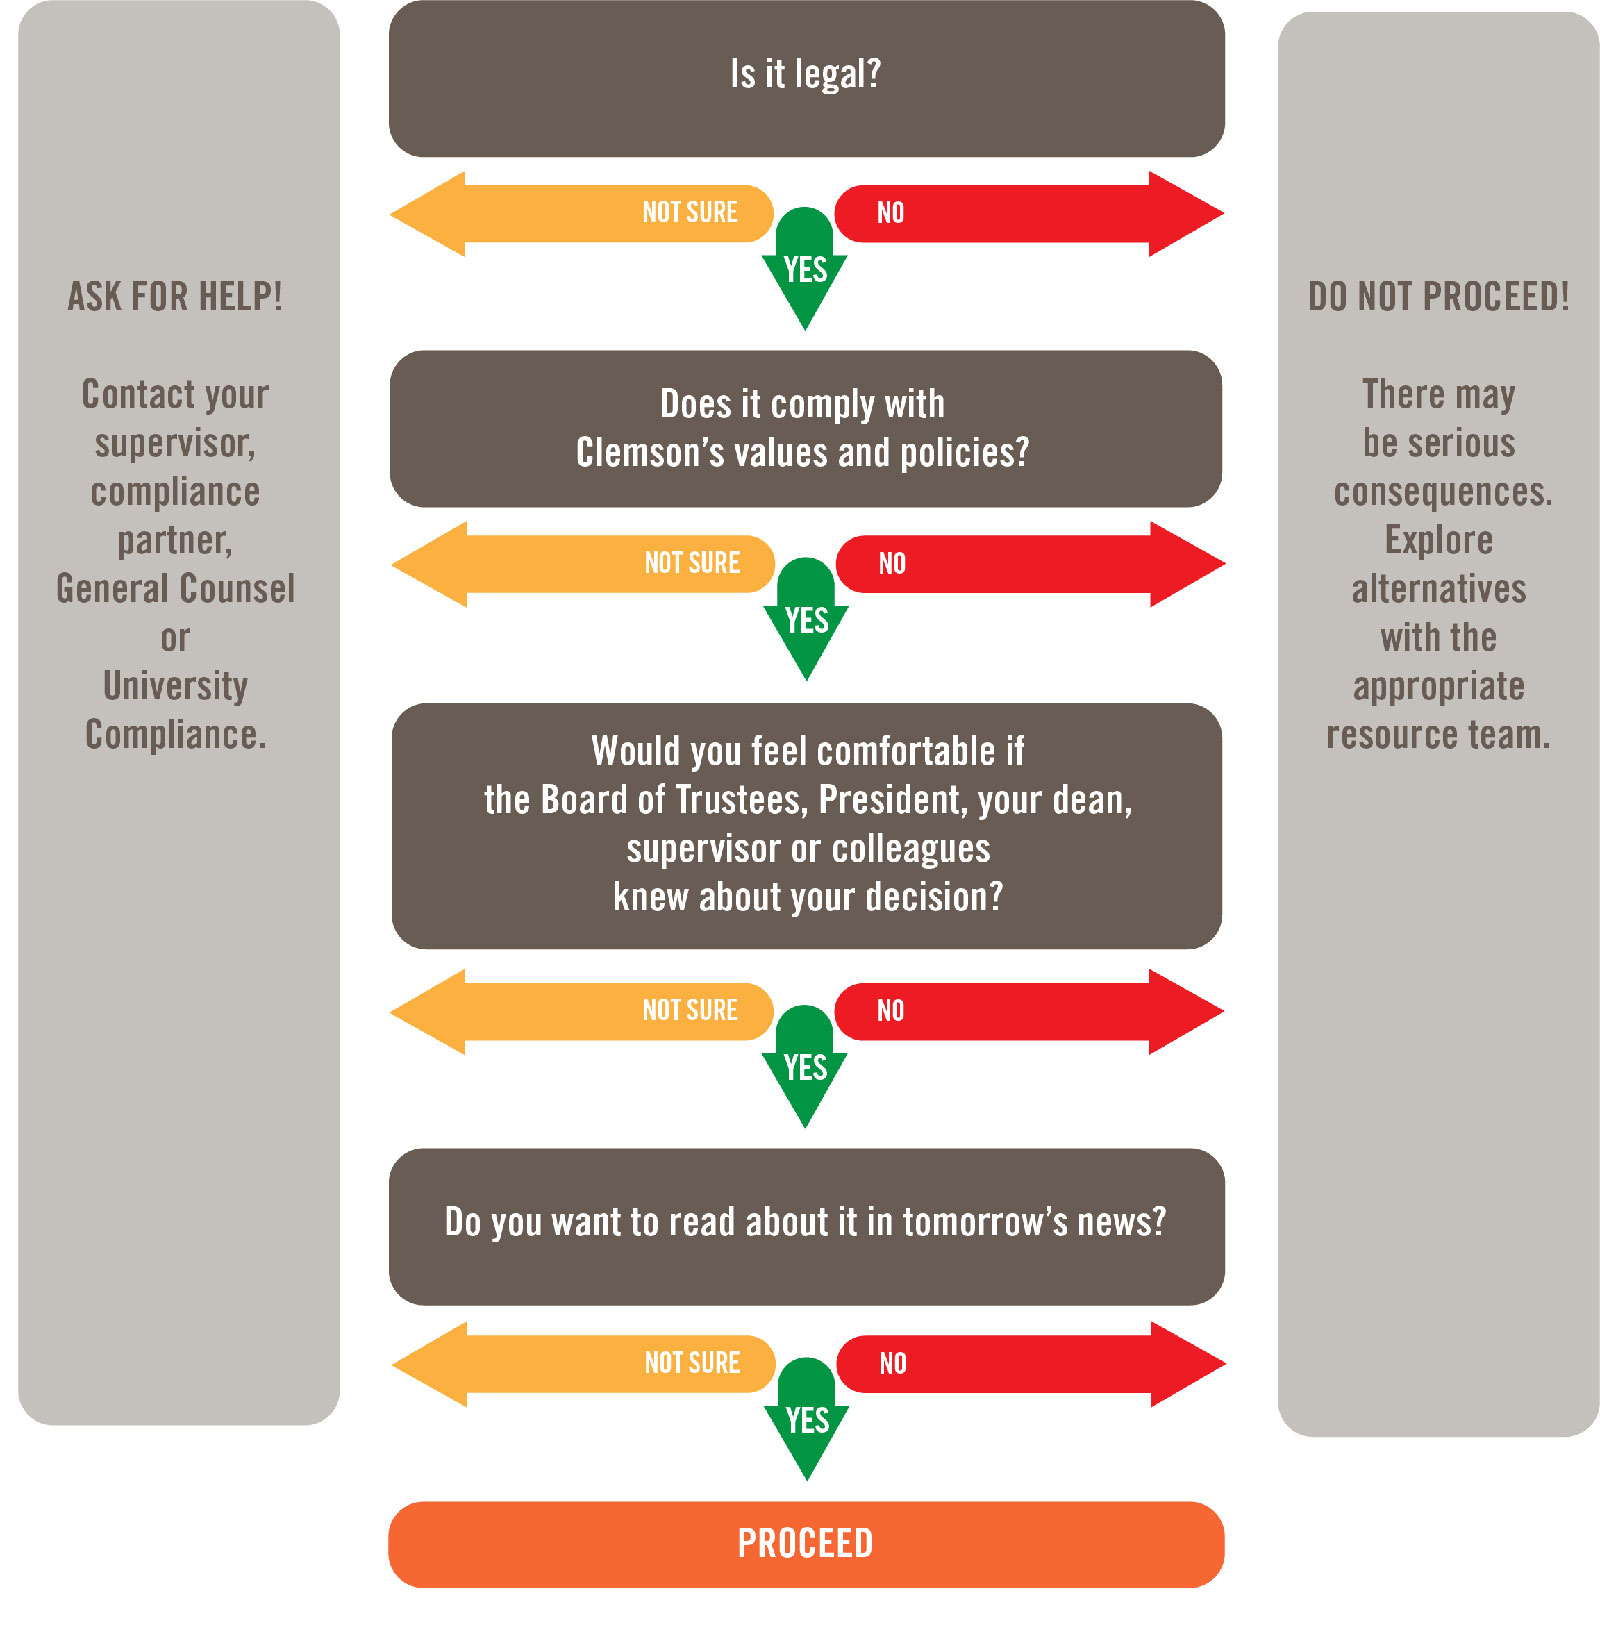 Decision Tree: help from Office of University Compliance and Ethics at Clemson University, Clemson SC